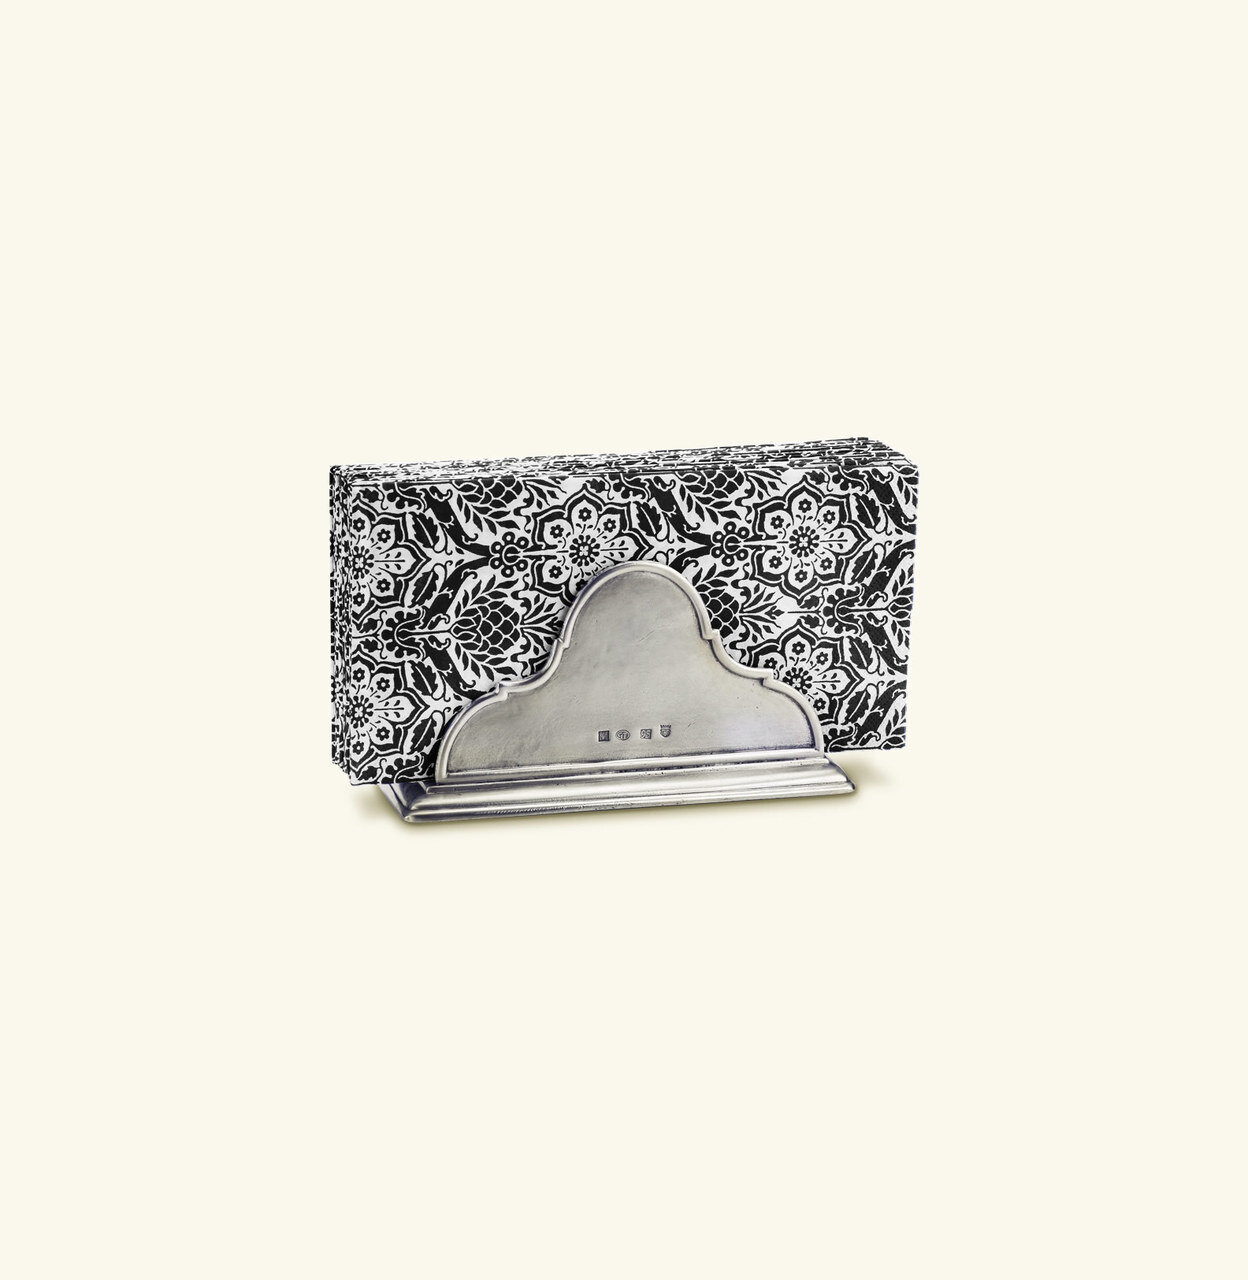 Match Pewter Napkin Holder With Dinner Napkin a842.0